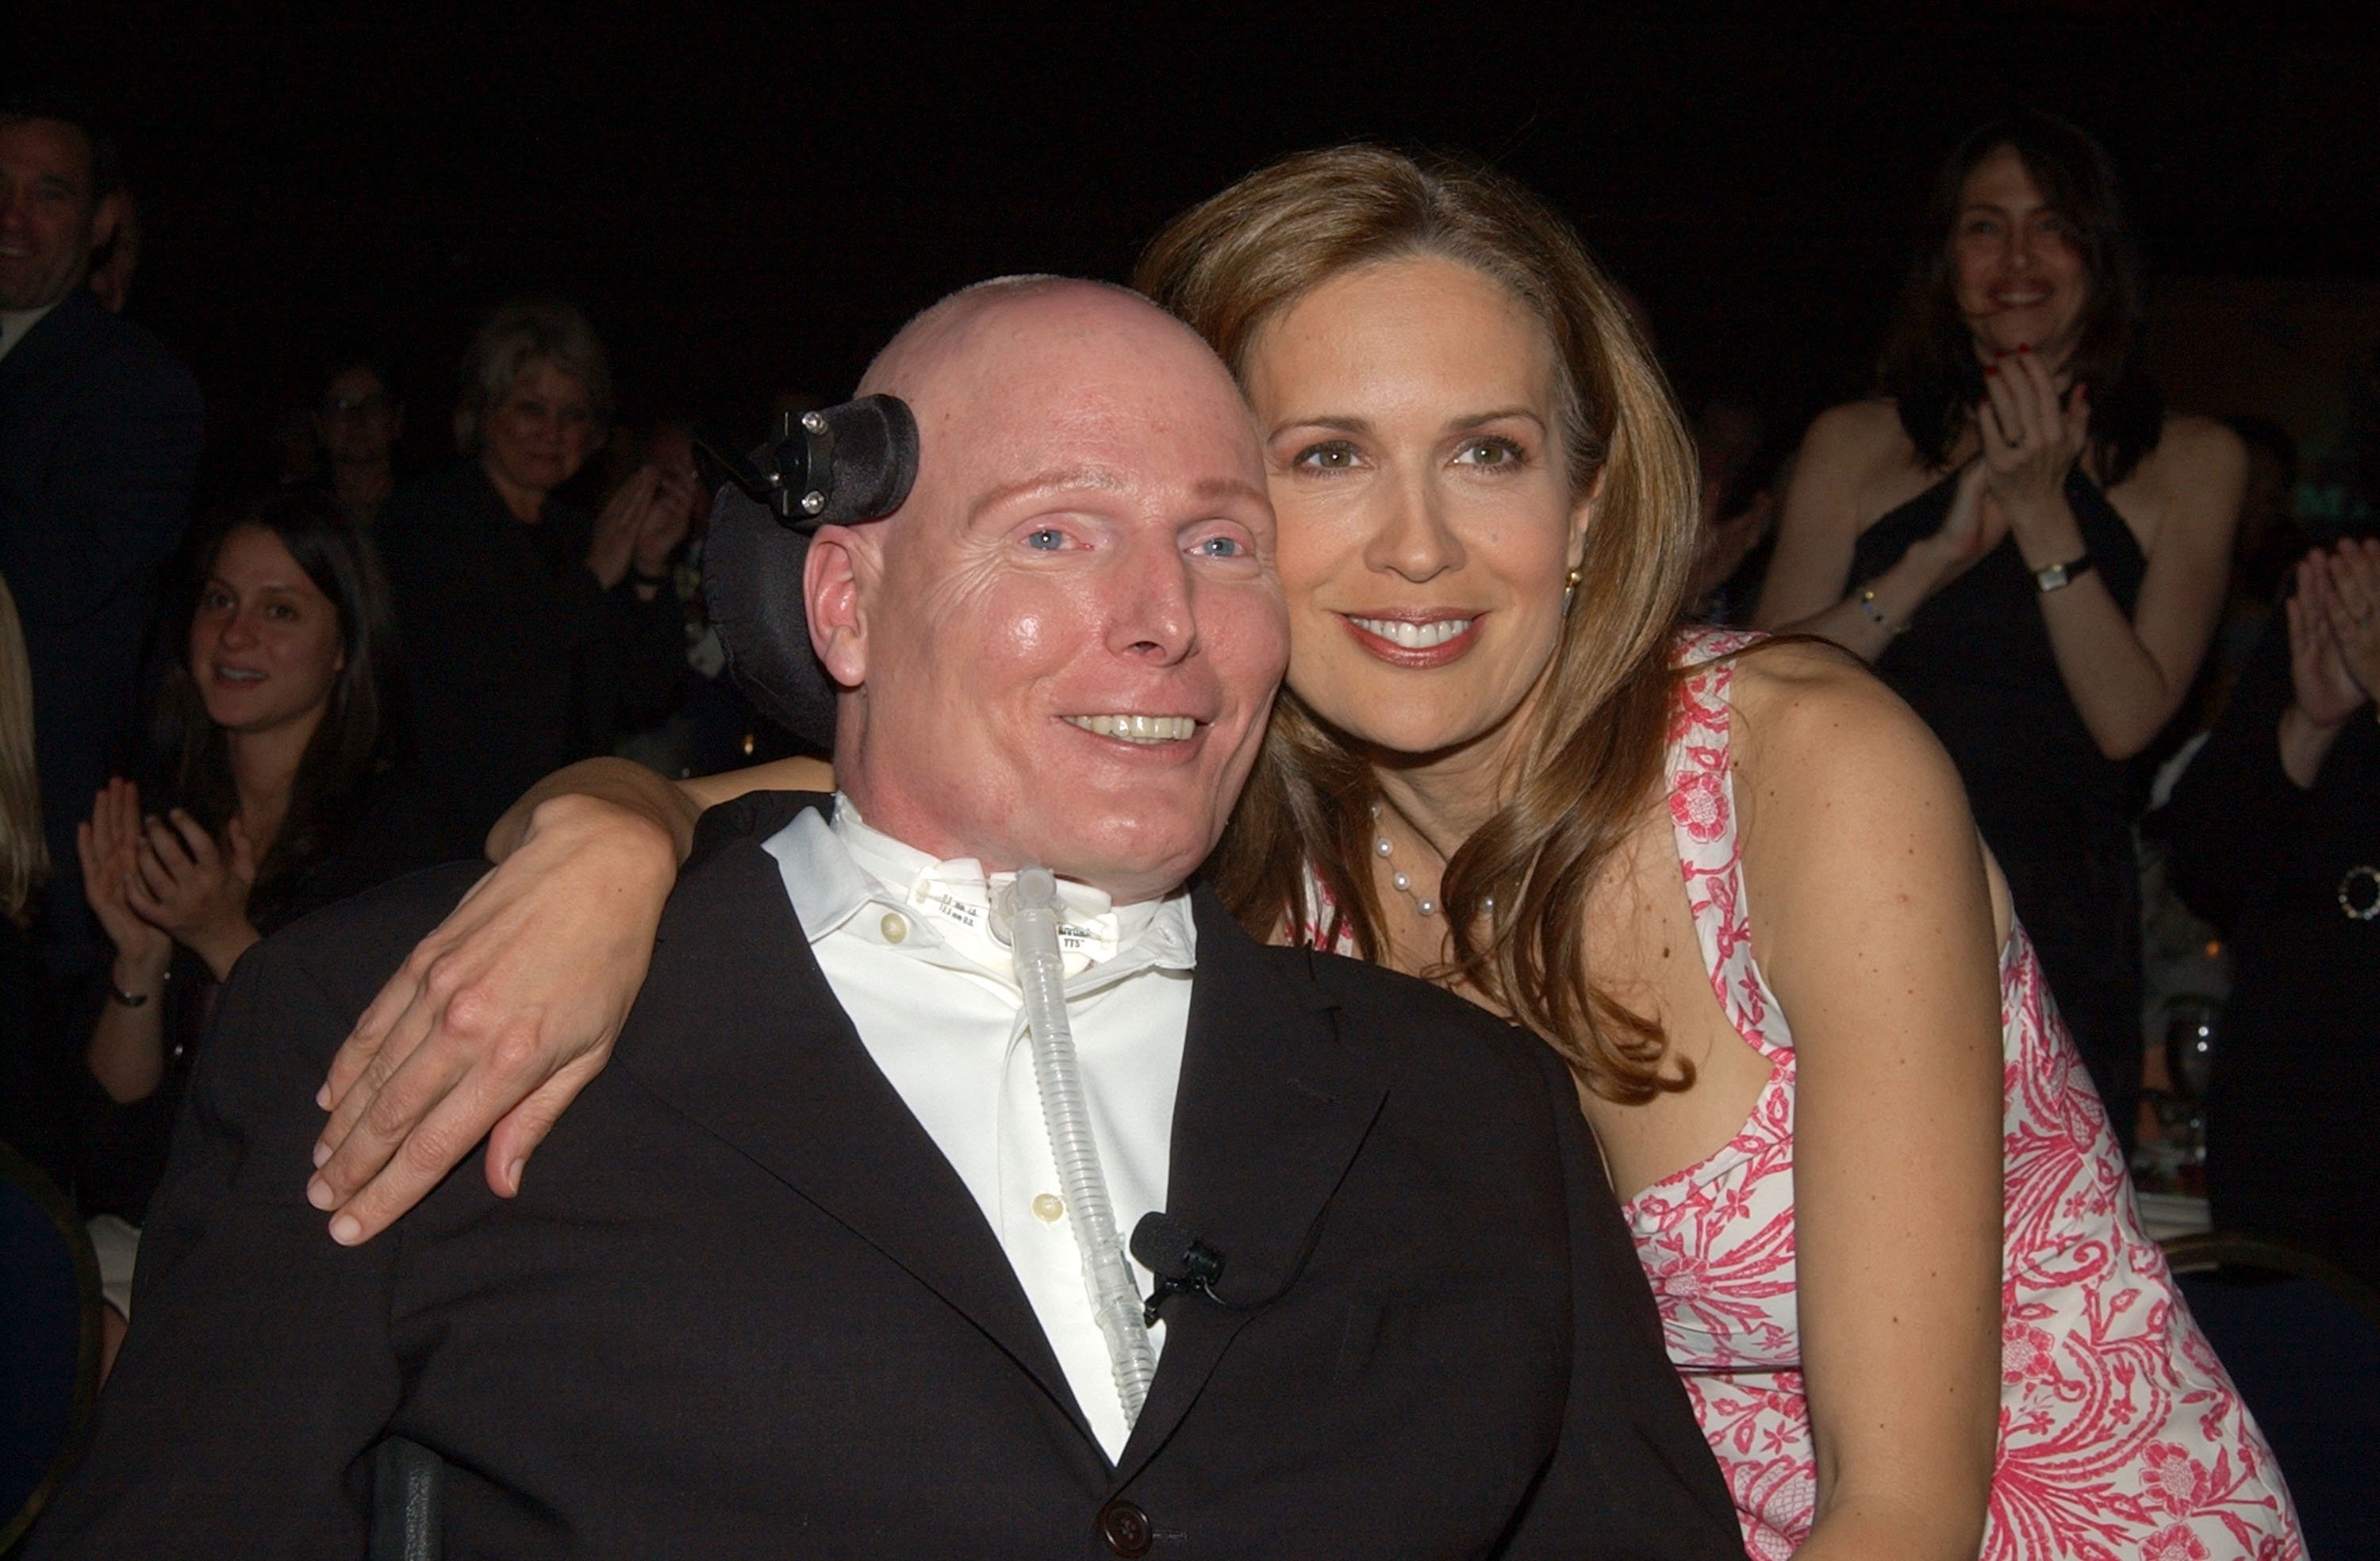 Dana Reeve and Christopher Reeve at the  AAFA American Image Awards To Benefit the Christopher Reeve Paralysis Foundation in 2003 | Source: Getty Images